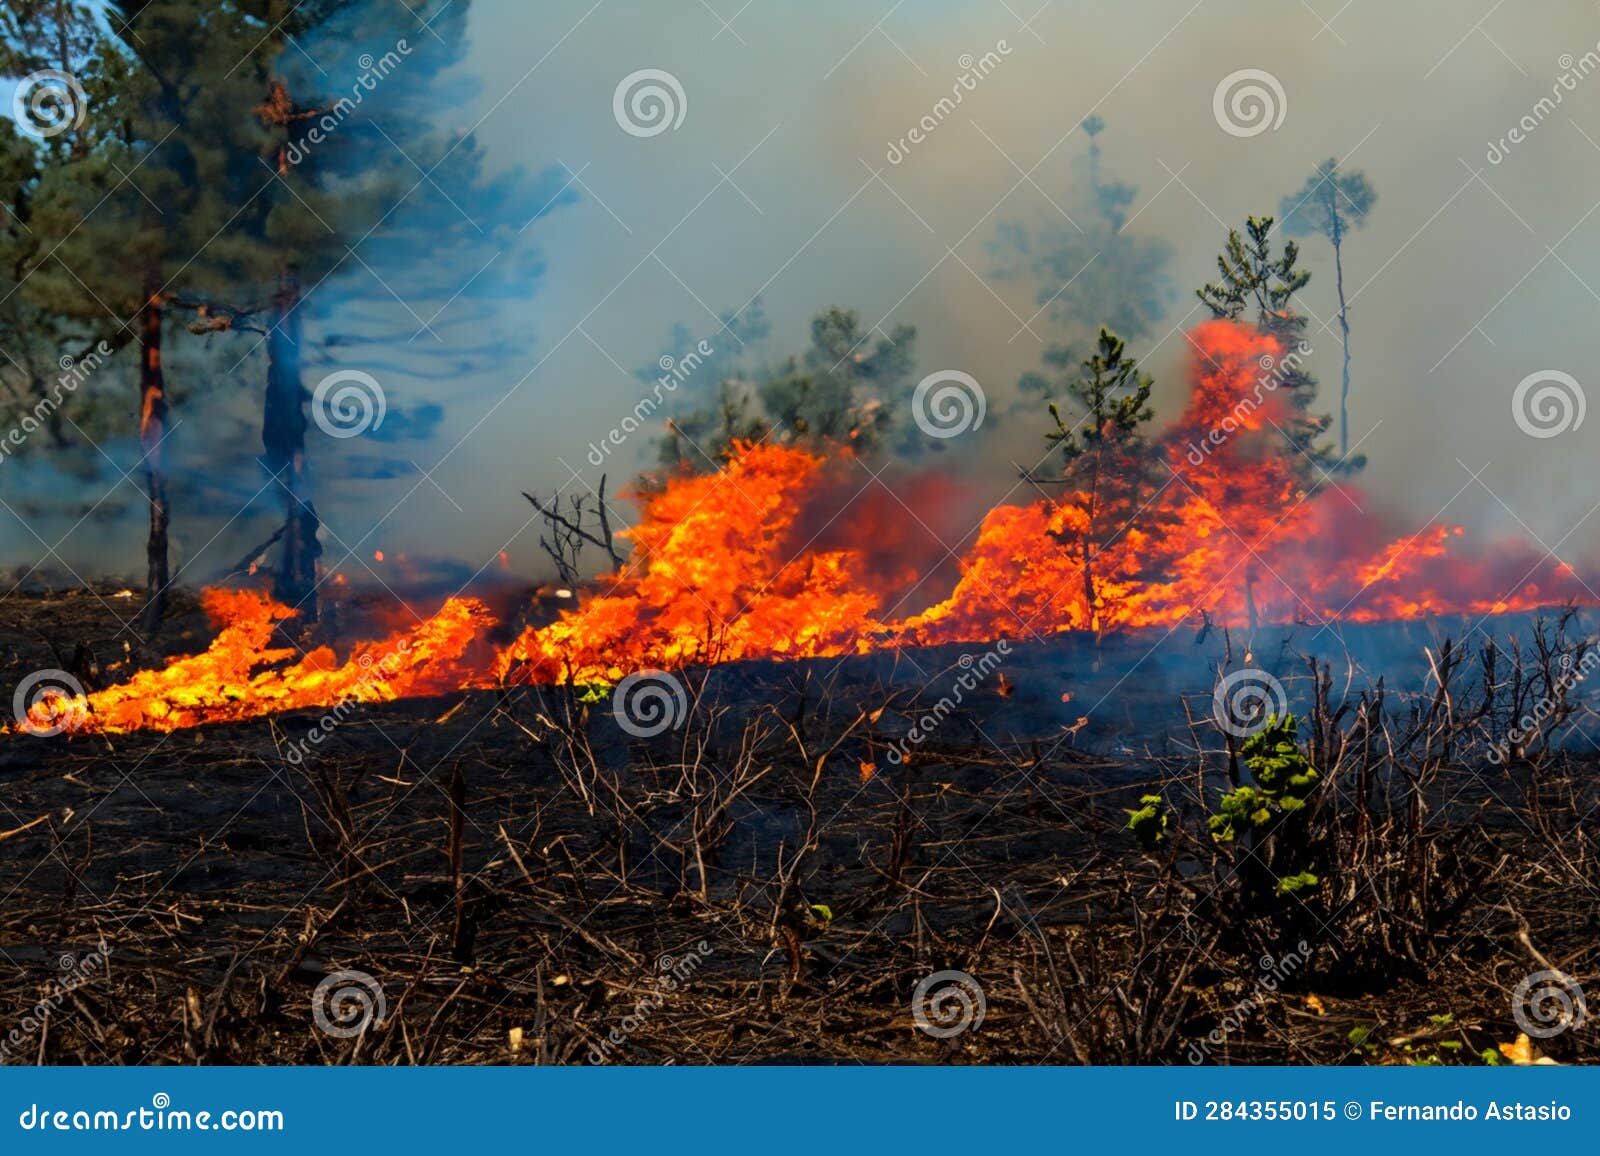 forest fire. forest fire in progress. wildfire. large flames of forest fire. incendio forestal. canada